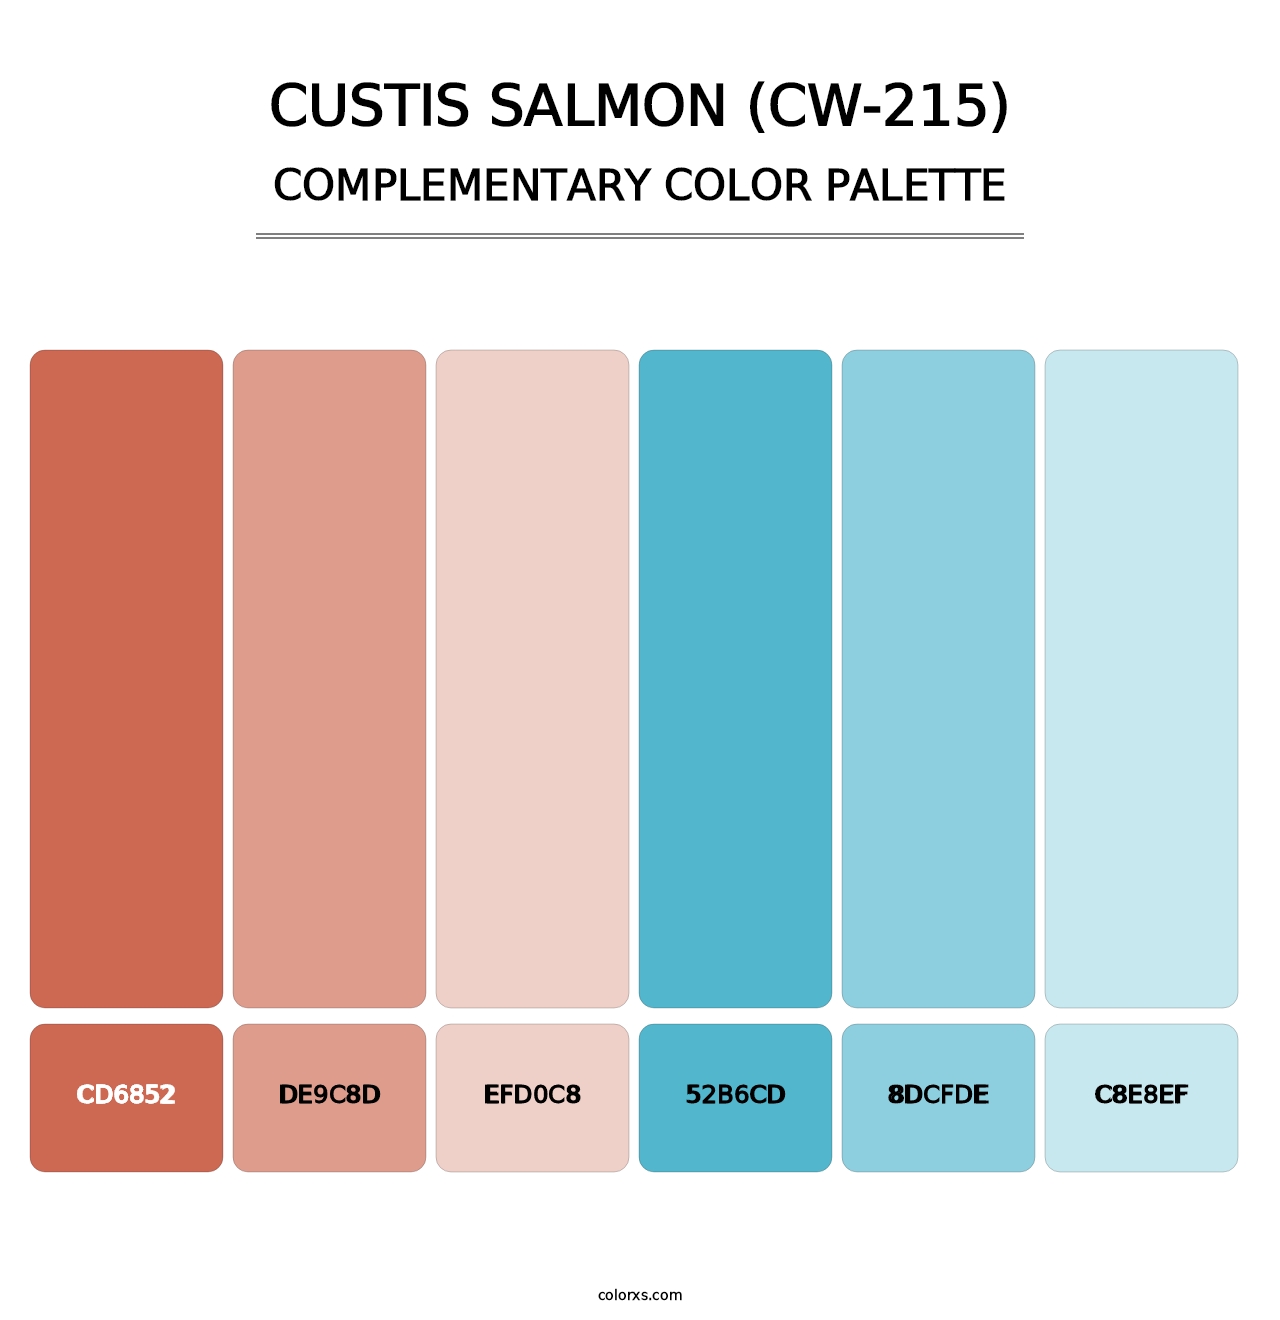 Custis Salmon (CW-215) - Complementary Color Palette